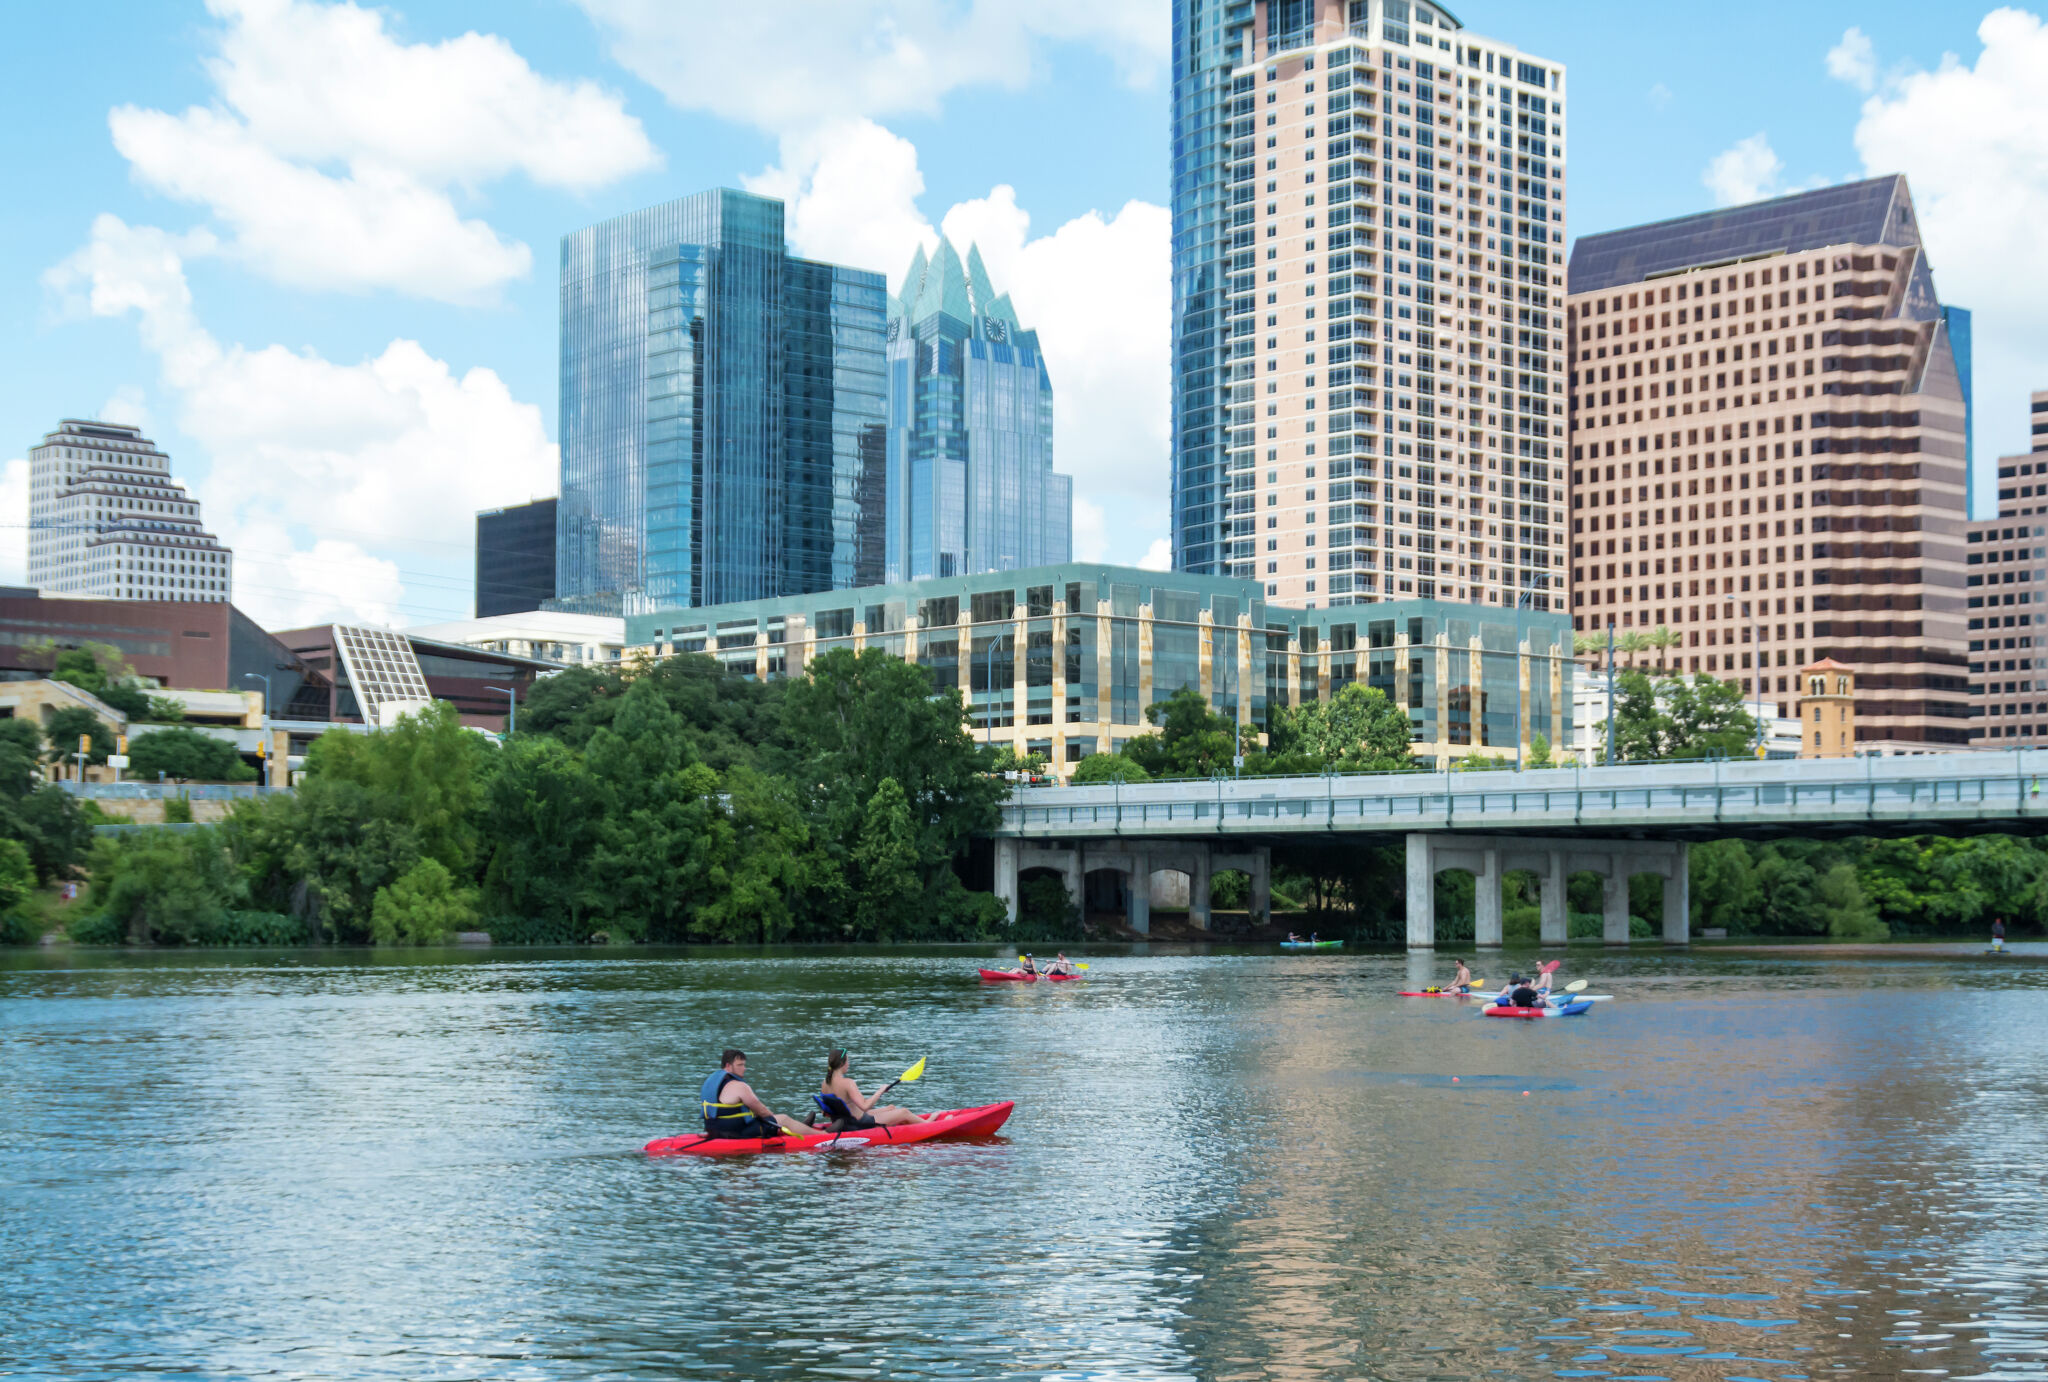 25 cool, unique things to do in Austin—according to a local